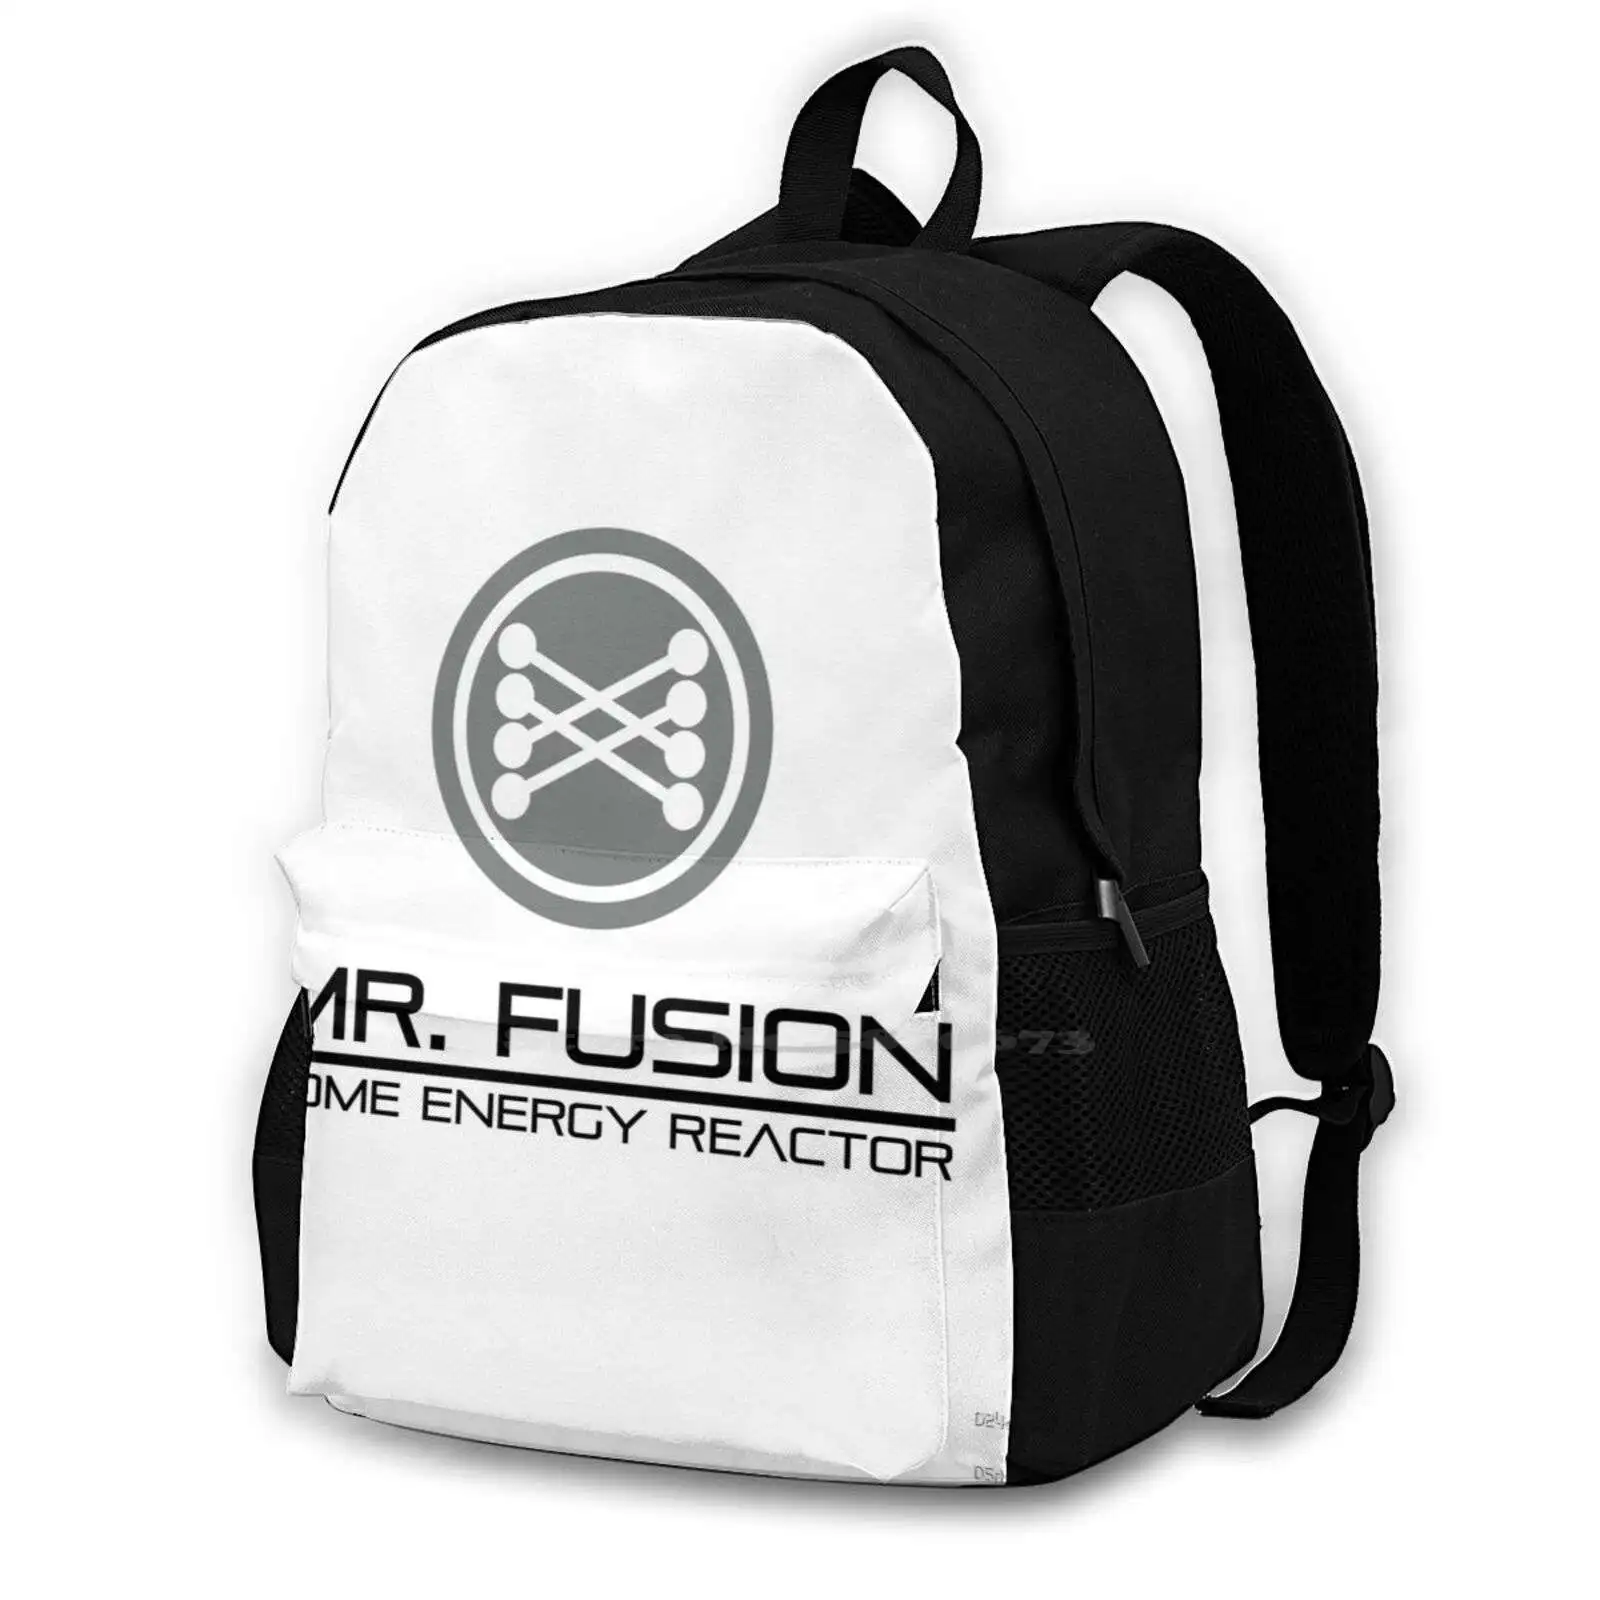 

Mr. Backpacks For School Teenagers Girls Travel Bags Back To The Future